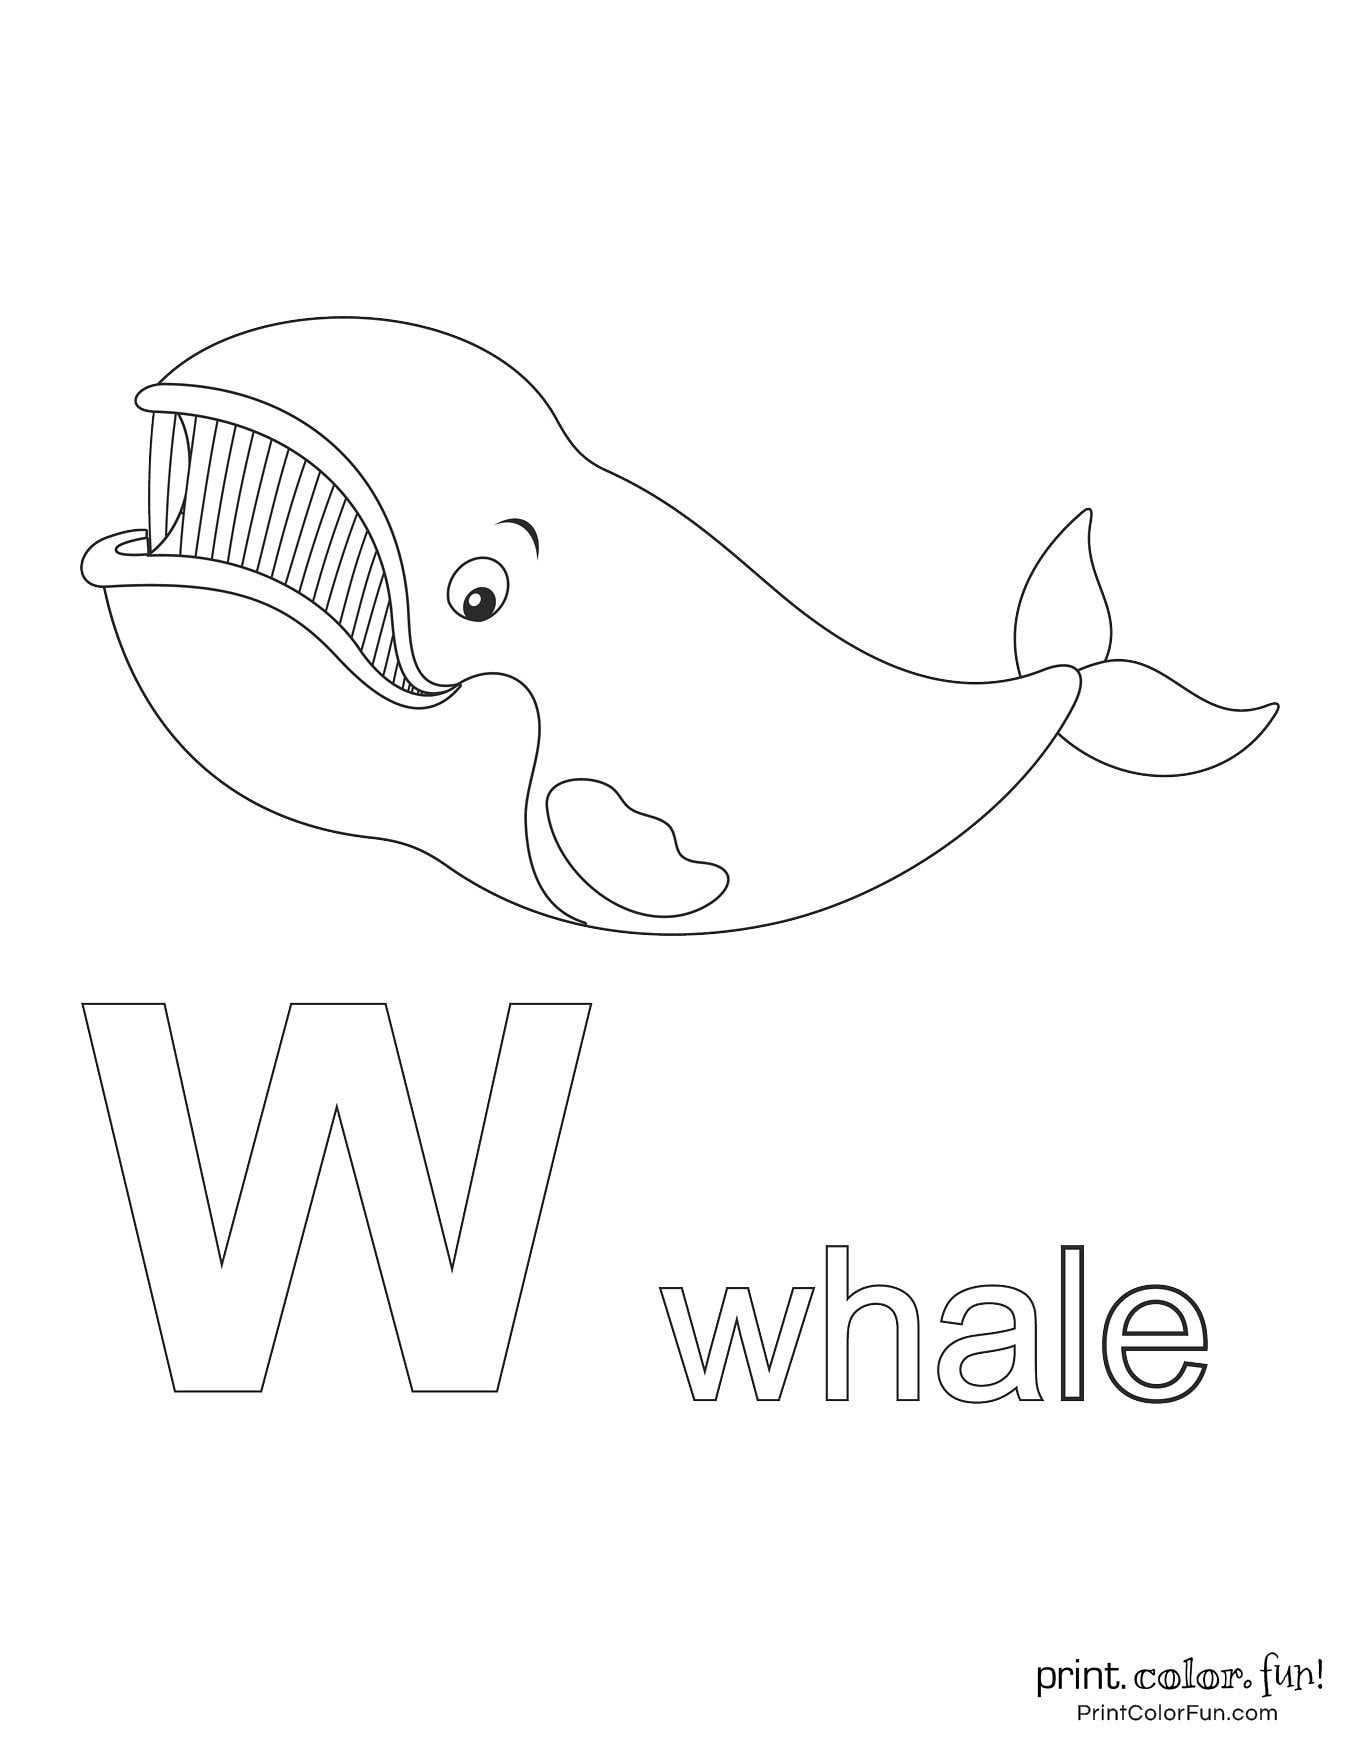 Whale drawings clipart add a splash of creativity fun to learning adventures at